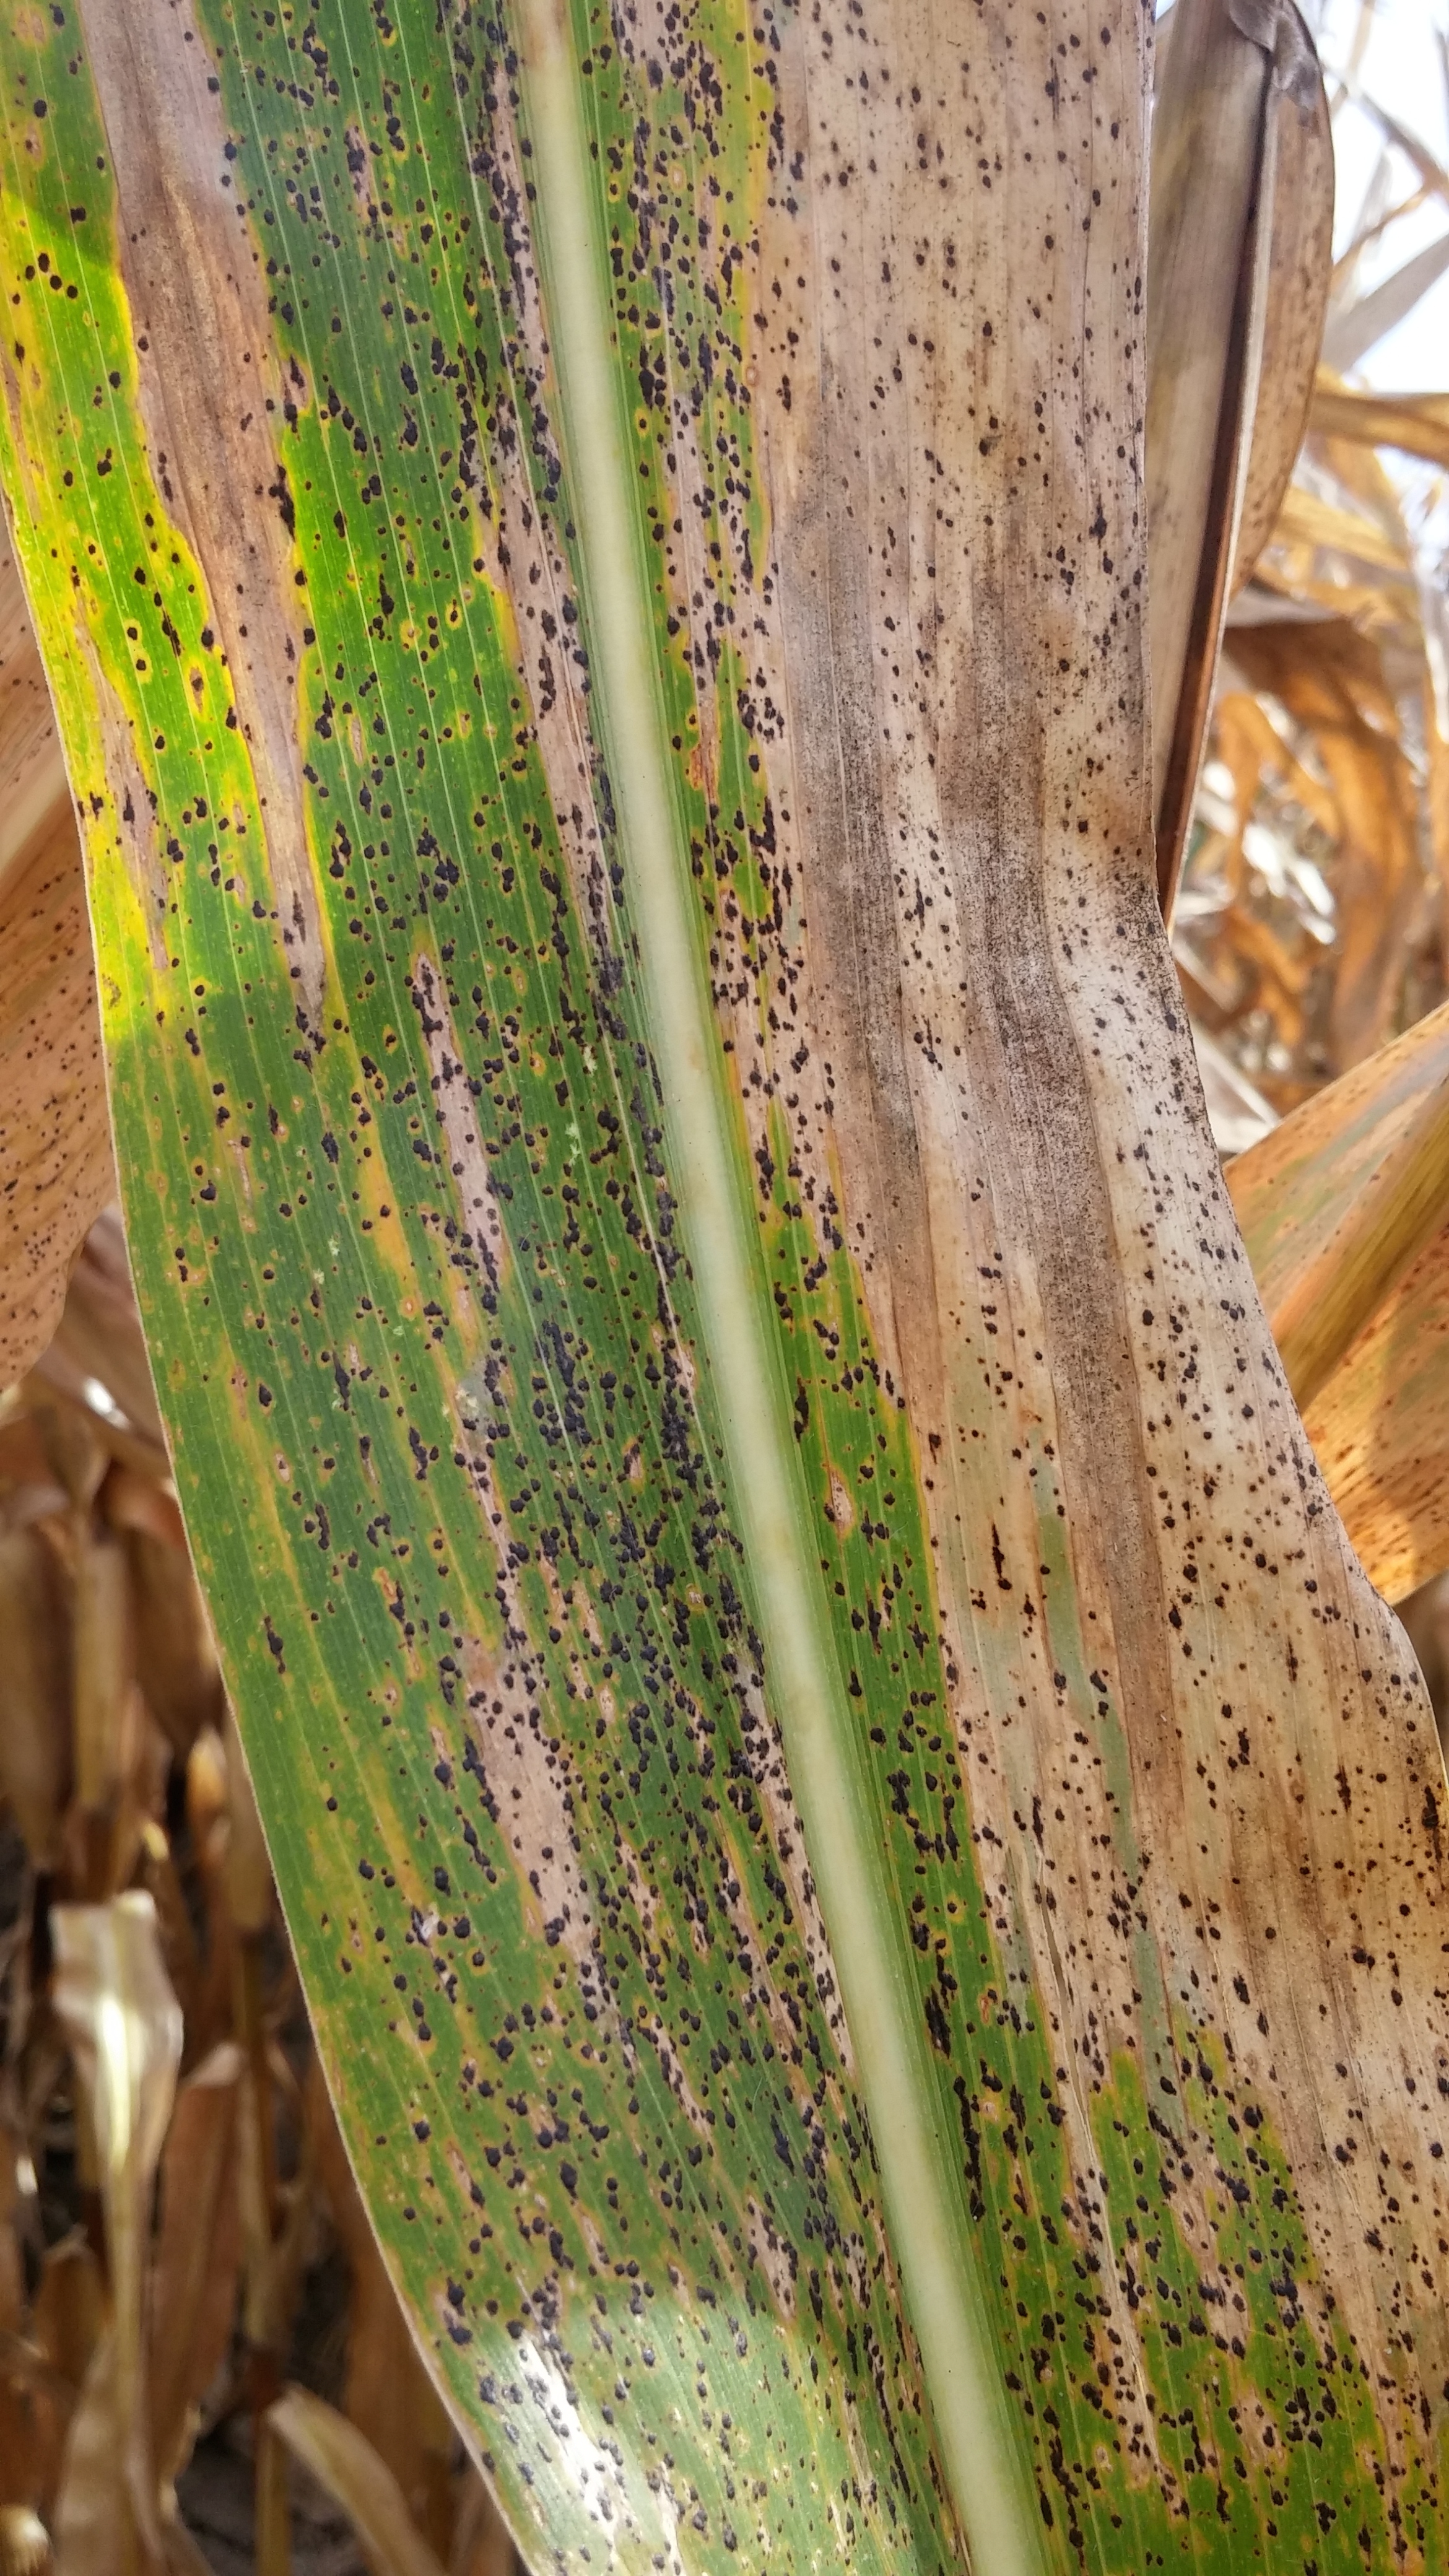 Typical tar spot symptoms and signs on corn leaf.